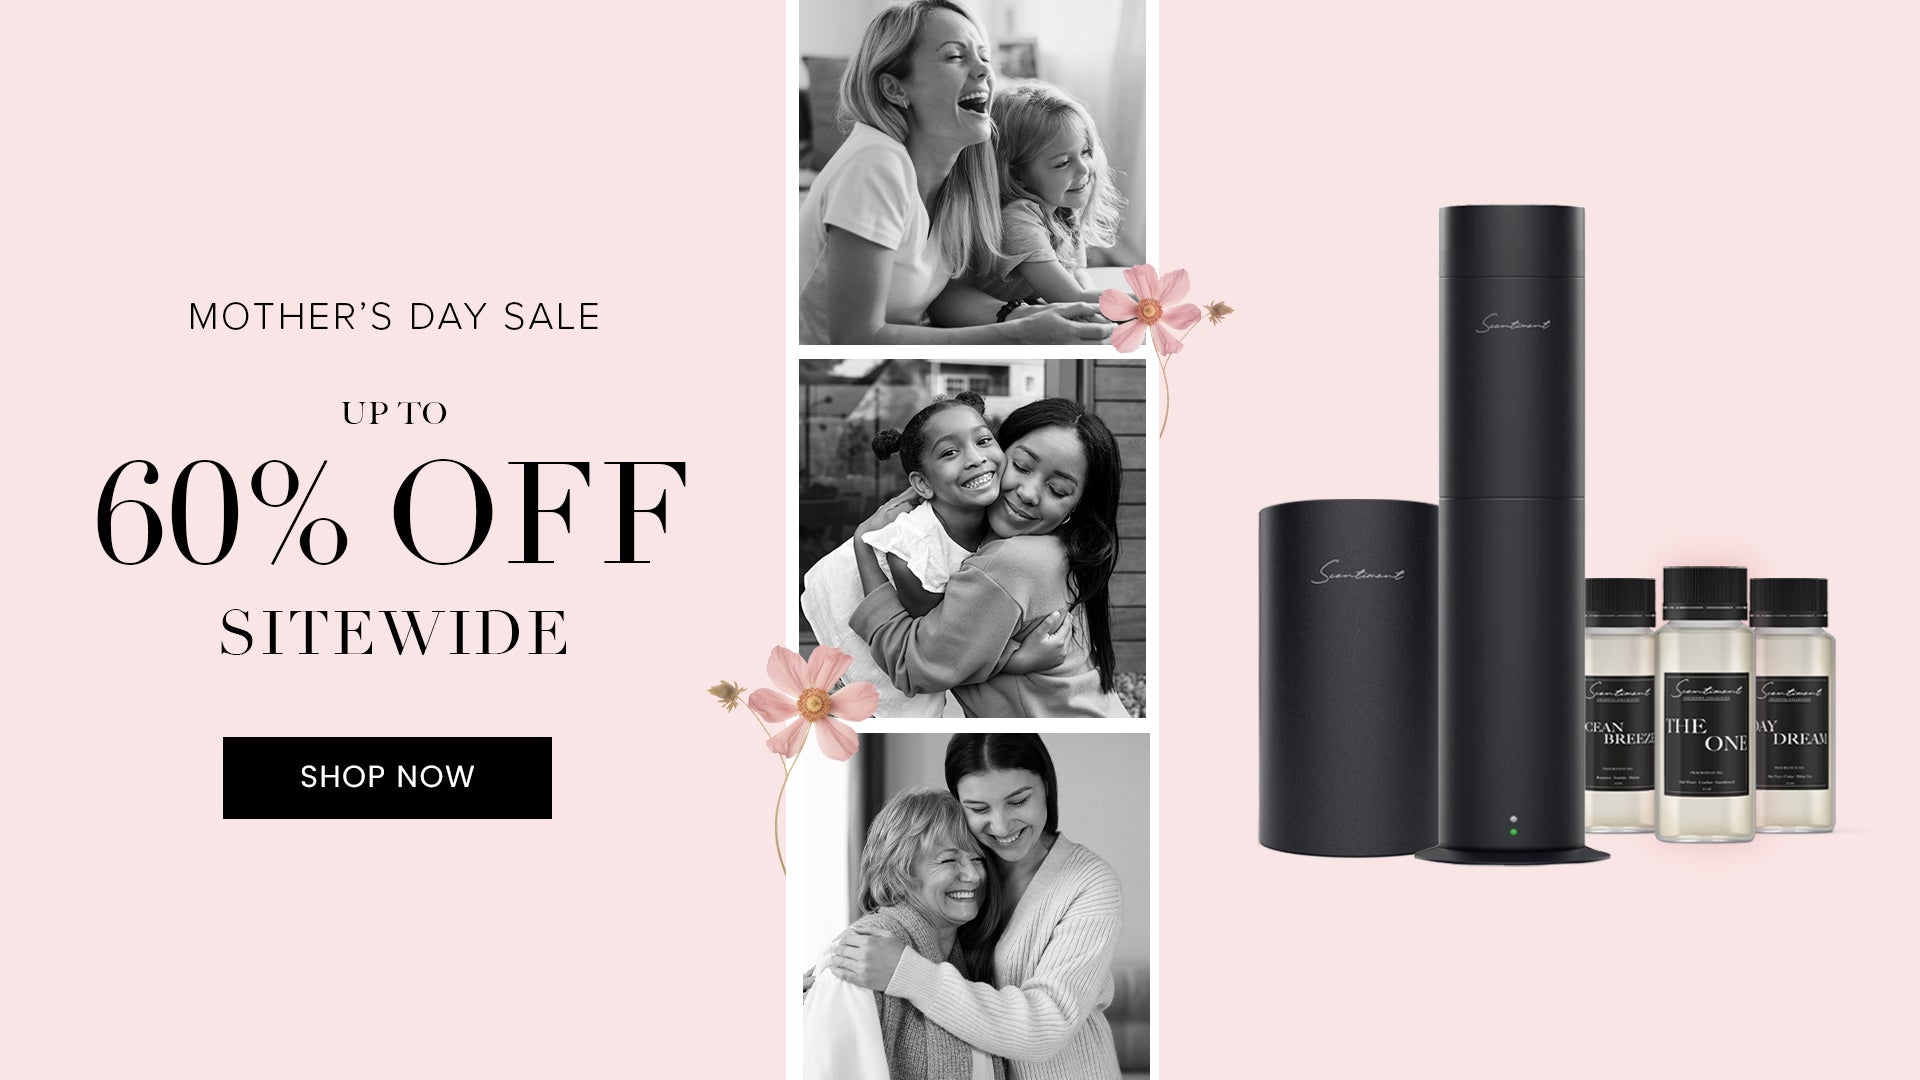 Mother's Day Sale: Up to 60% OFF Sitewide! Shop Now